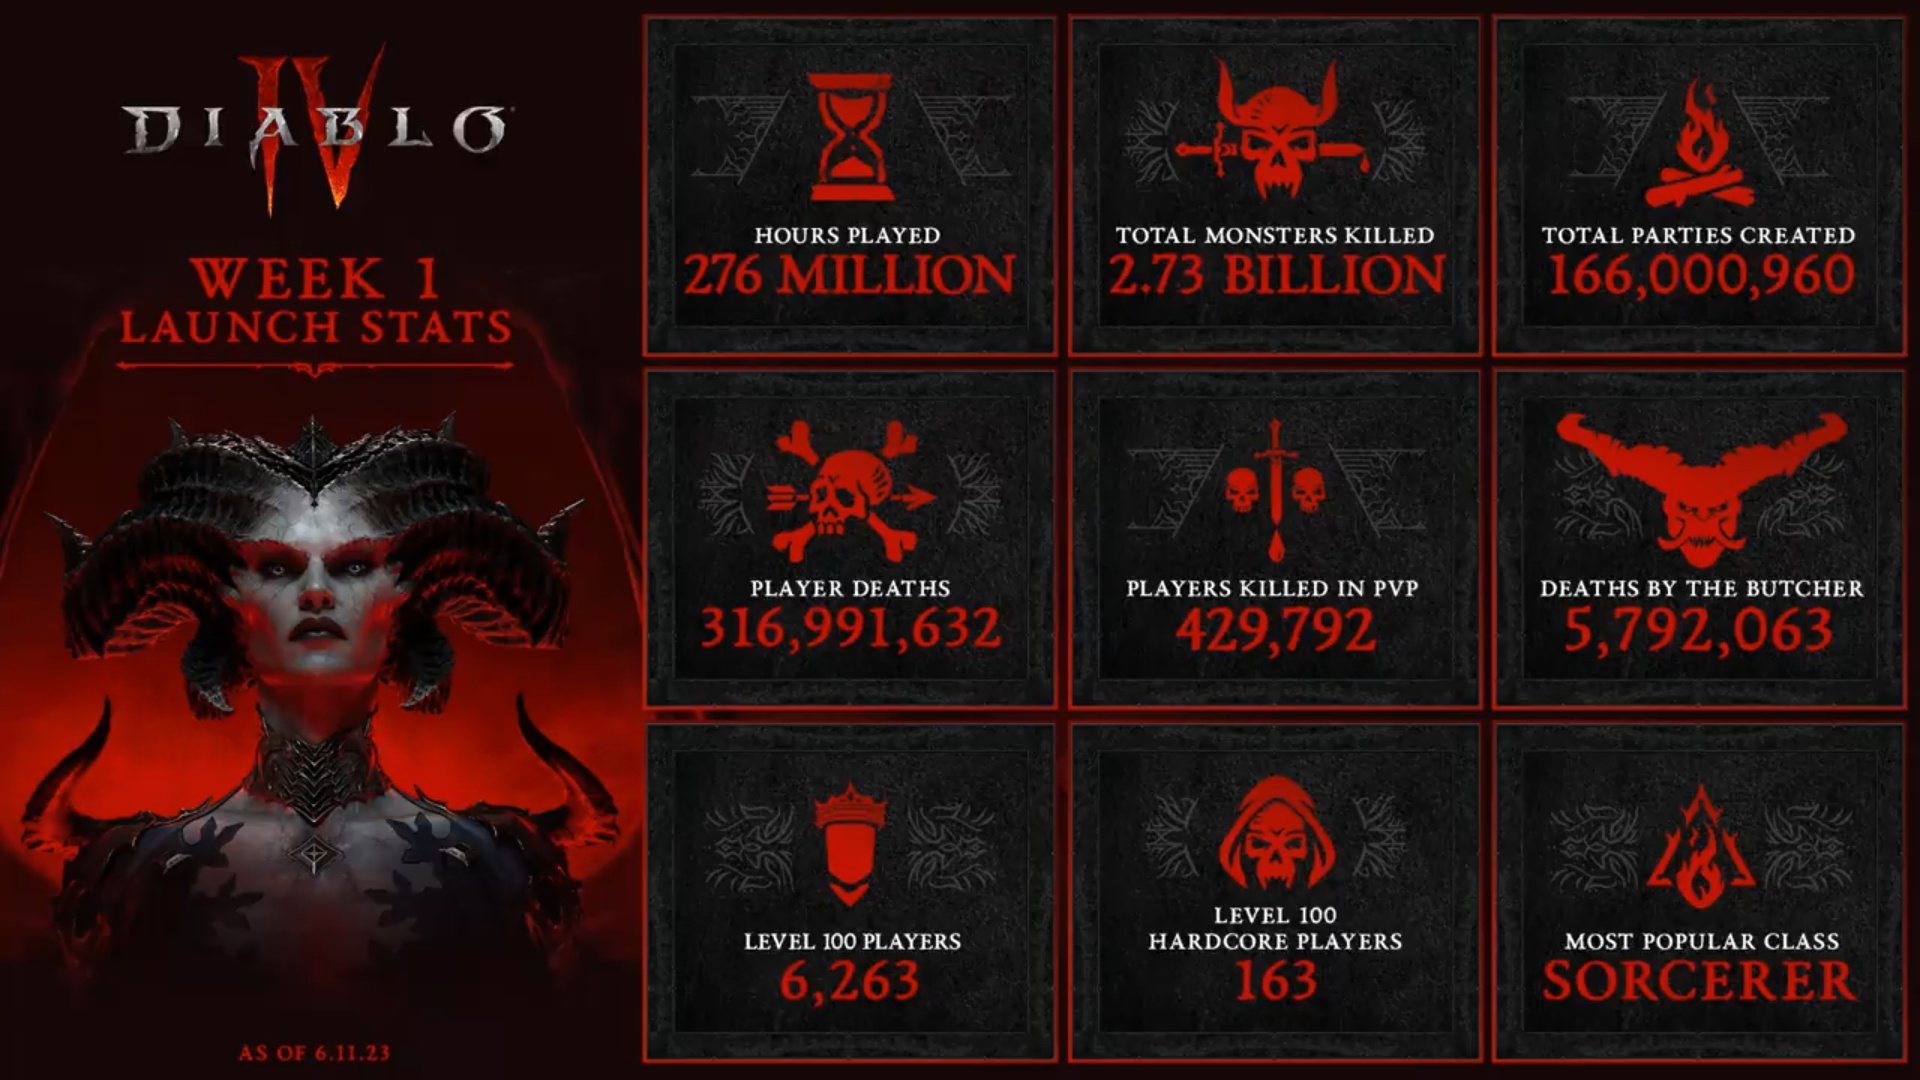 Diablo 4 completion time: How long does it take to beat the campaign?